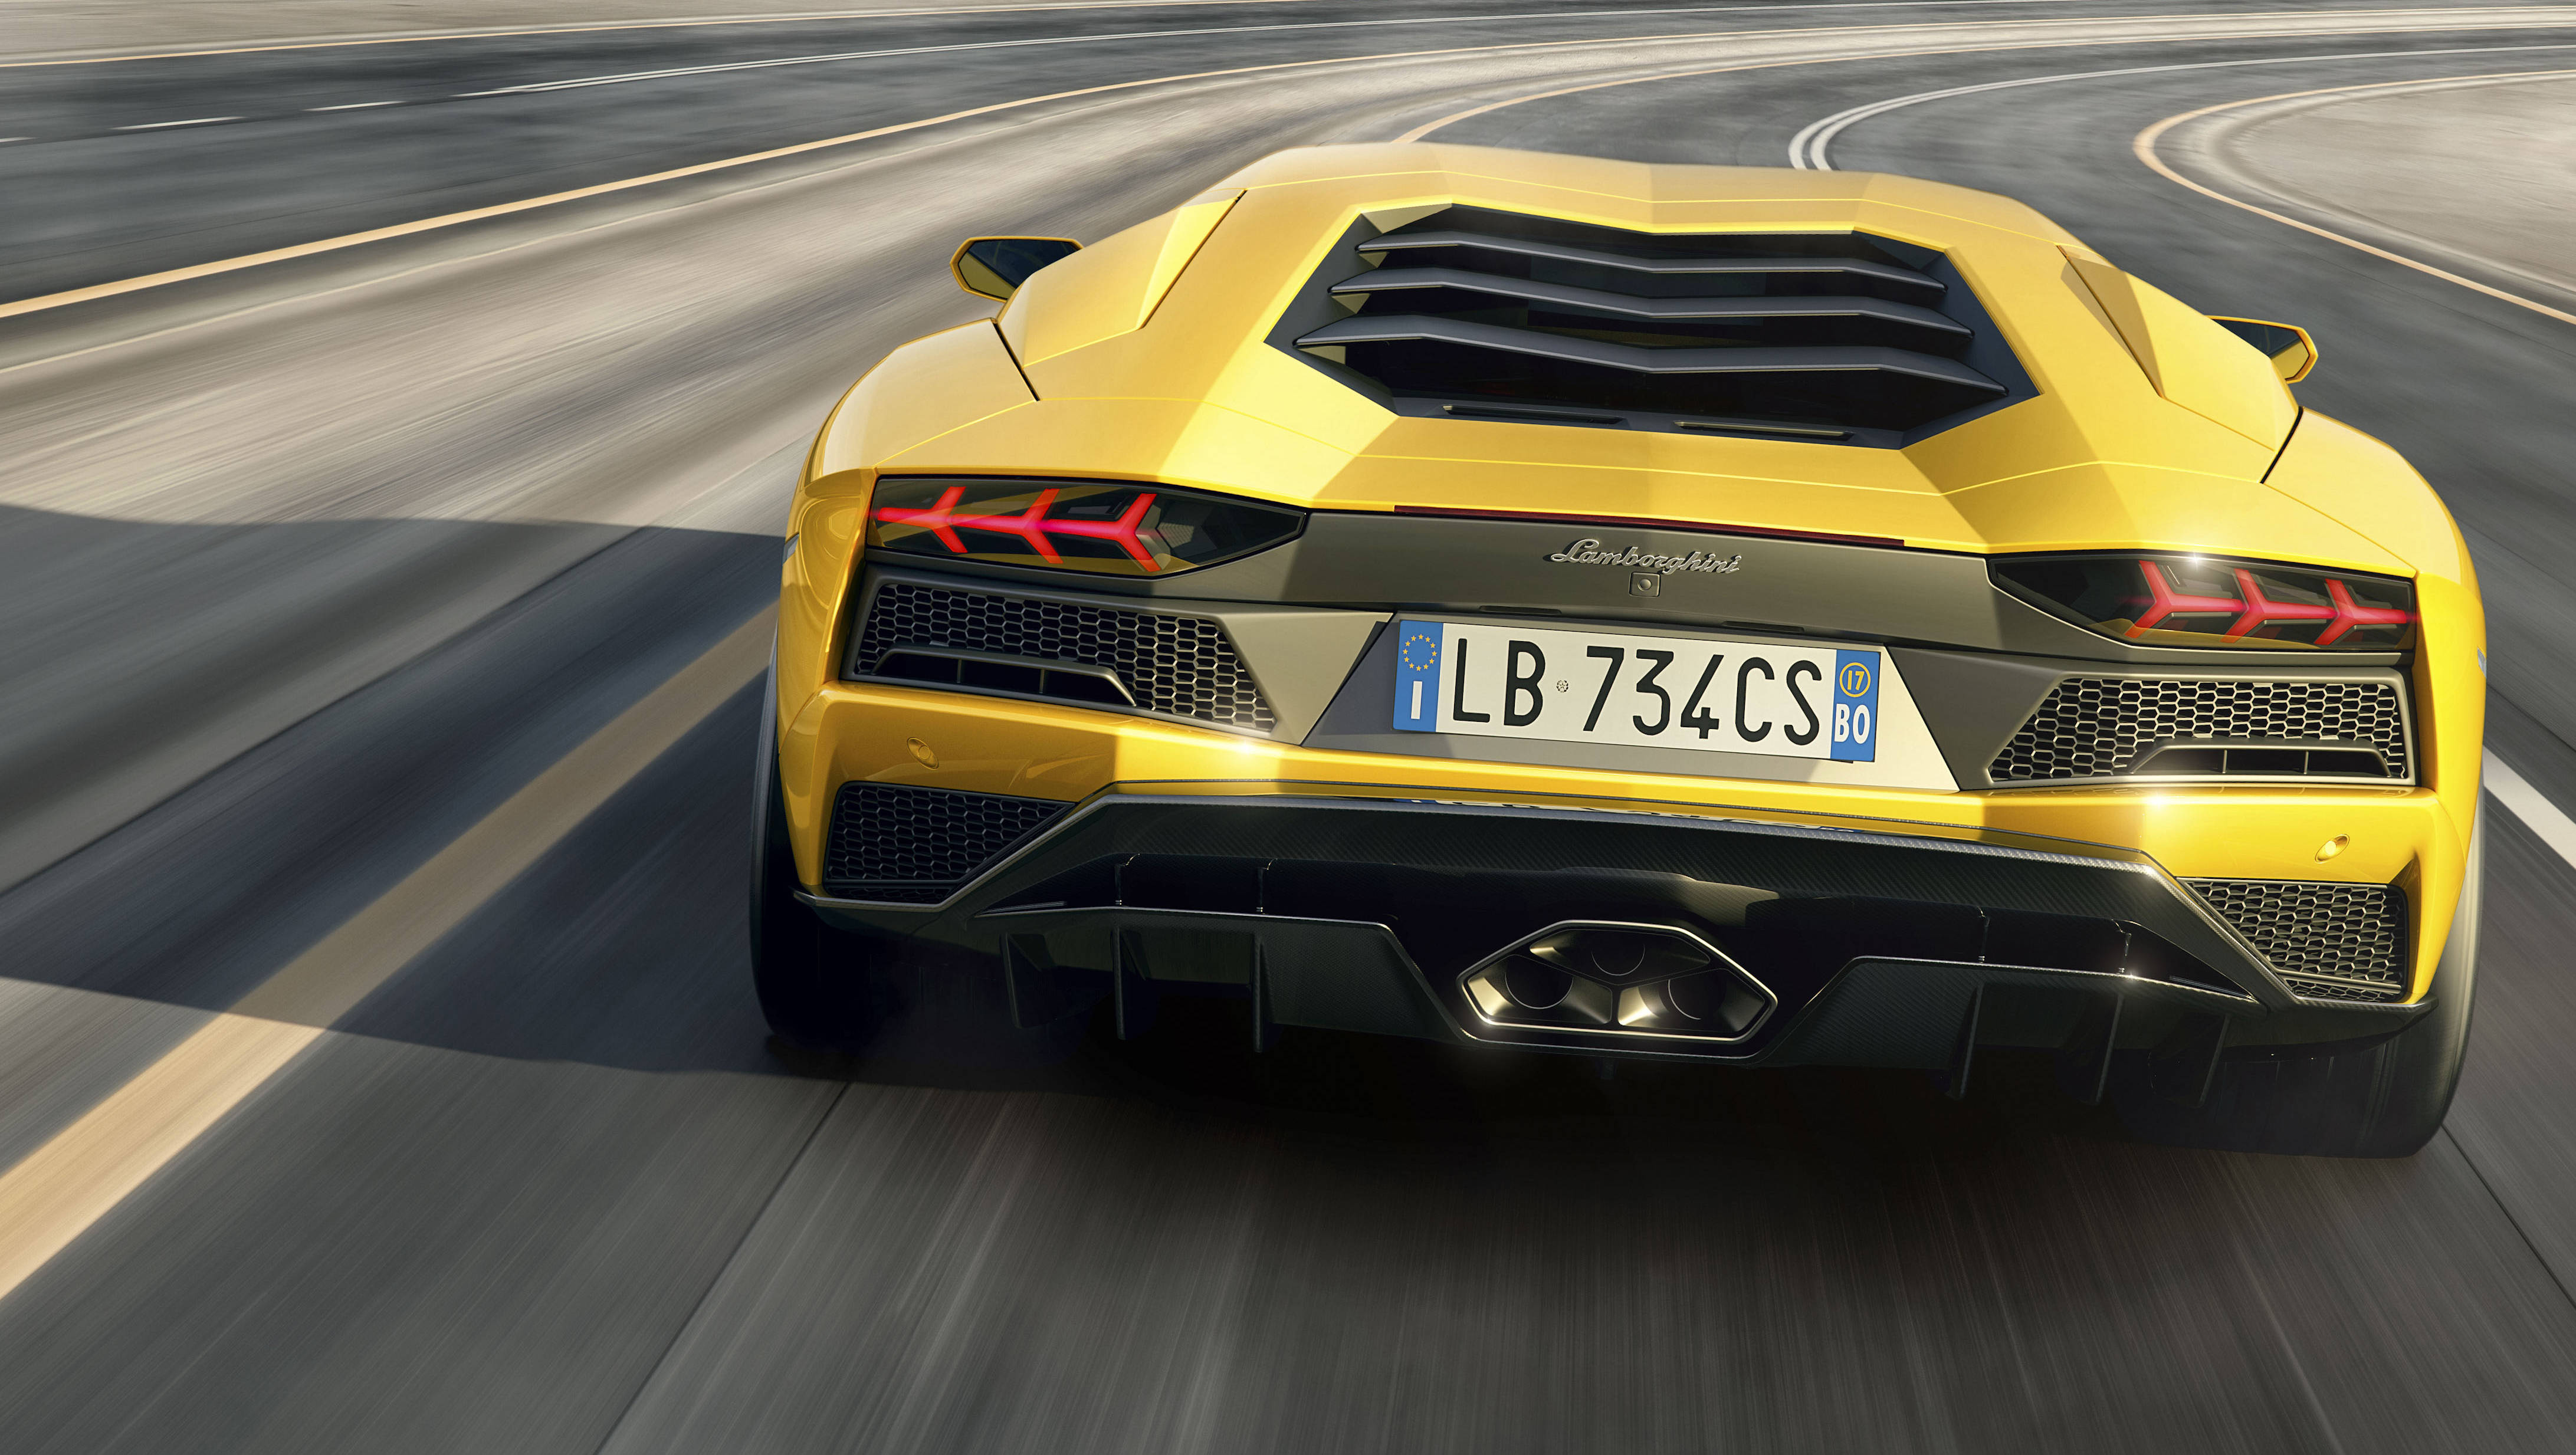 Lamborghini Aventador S launched in India at Rs 5.01 cr ...